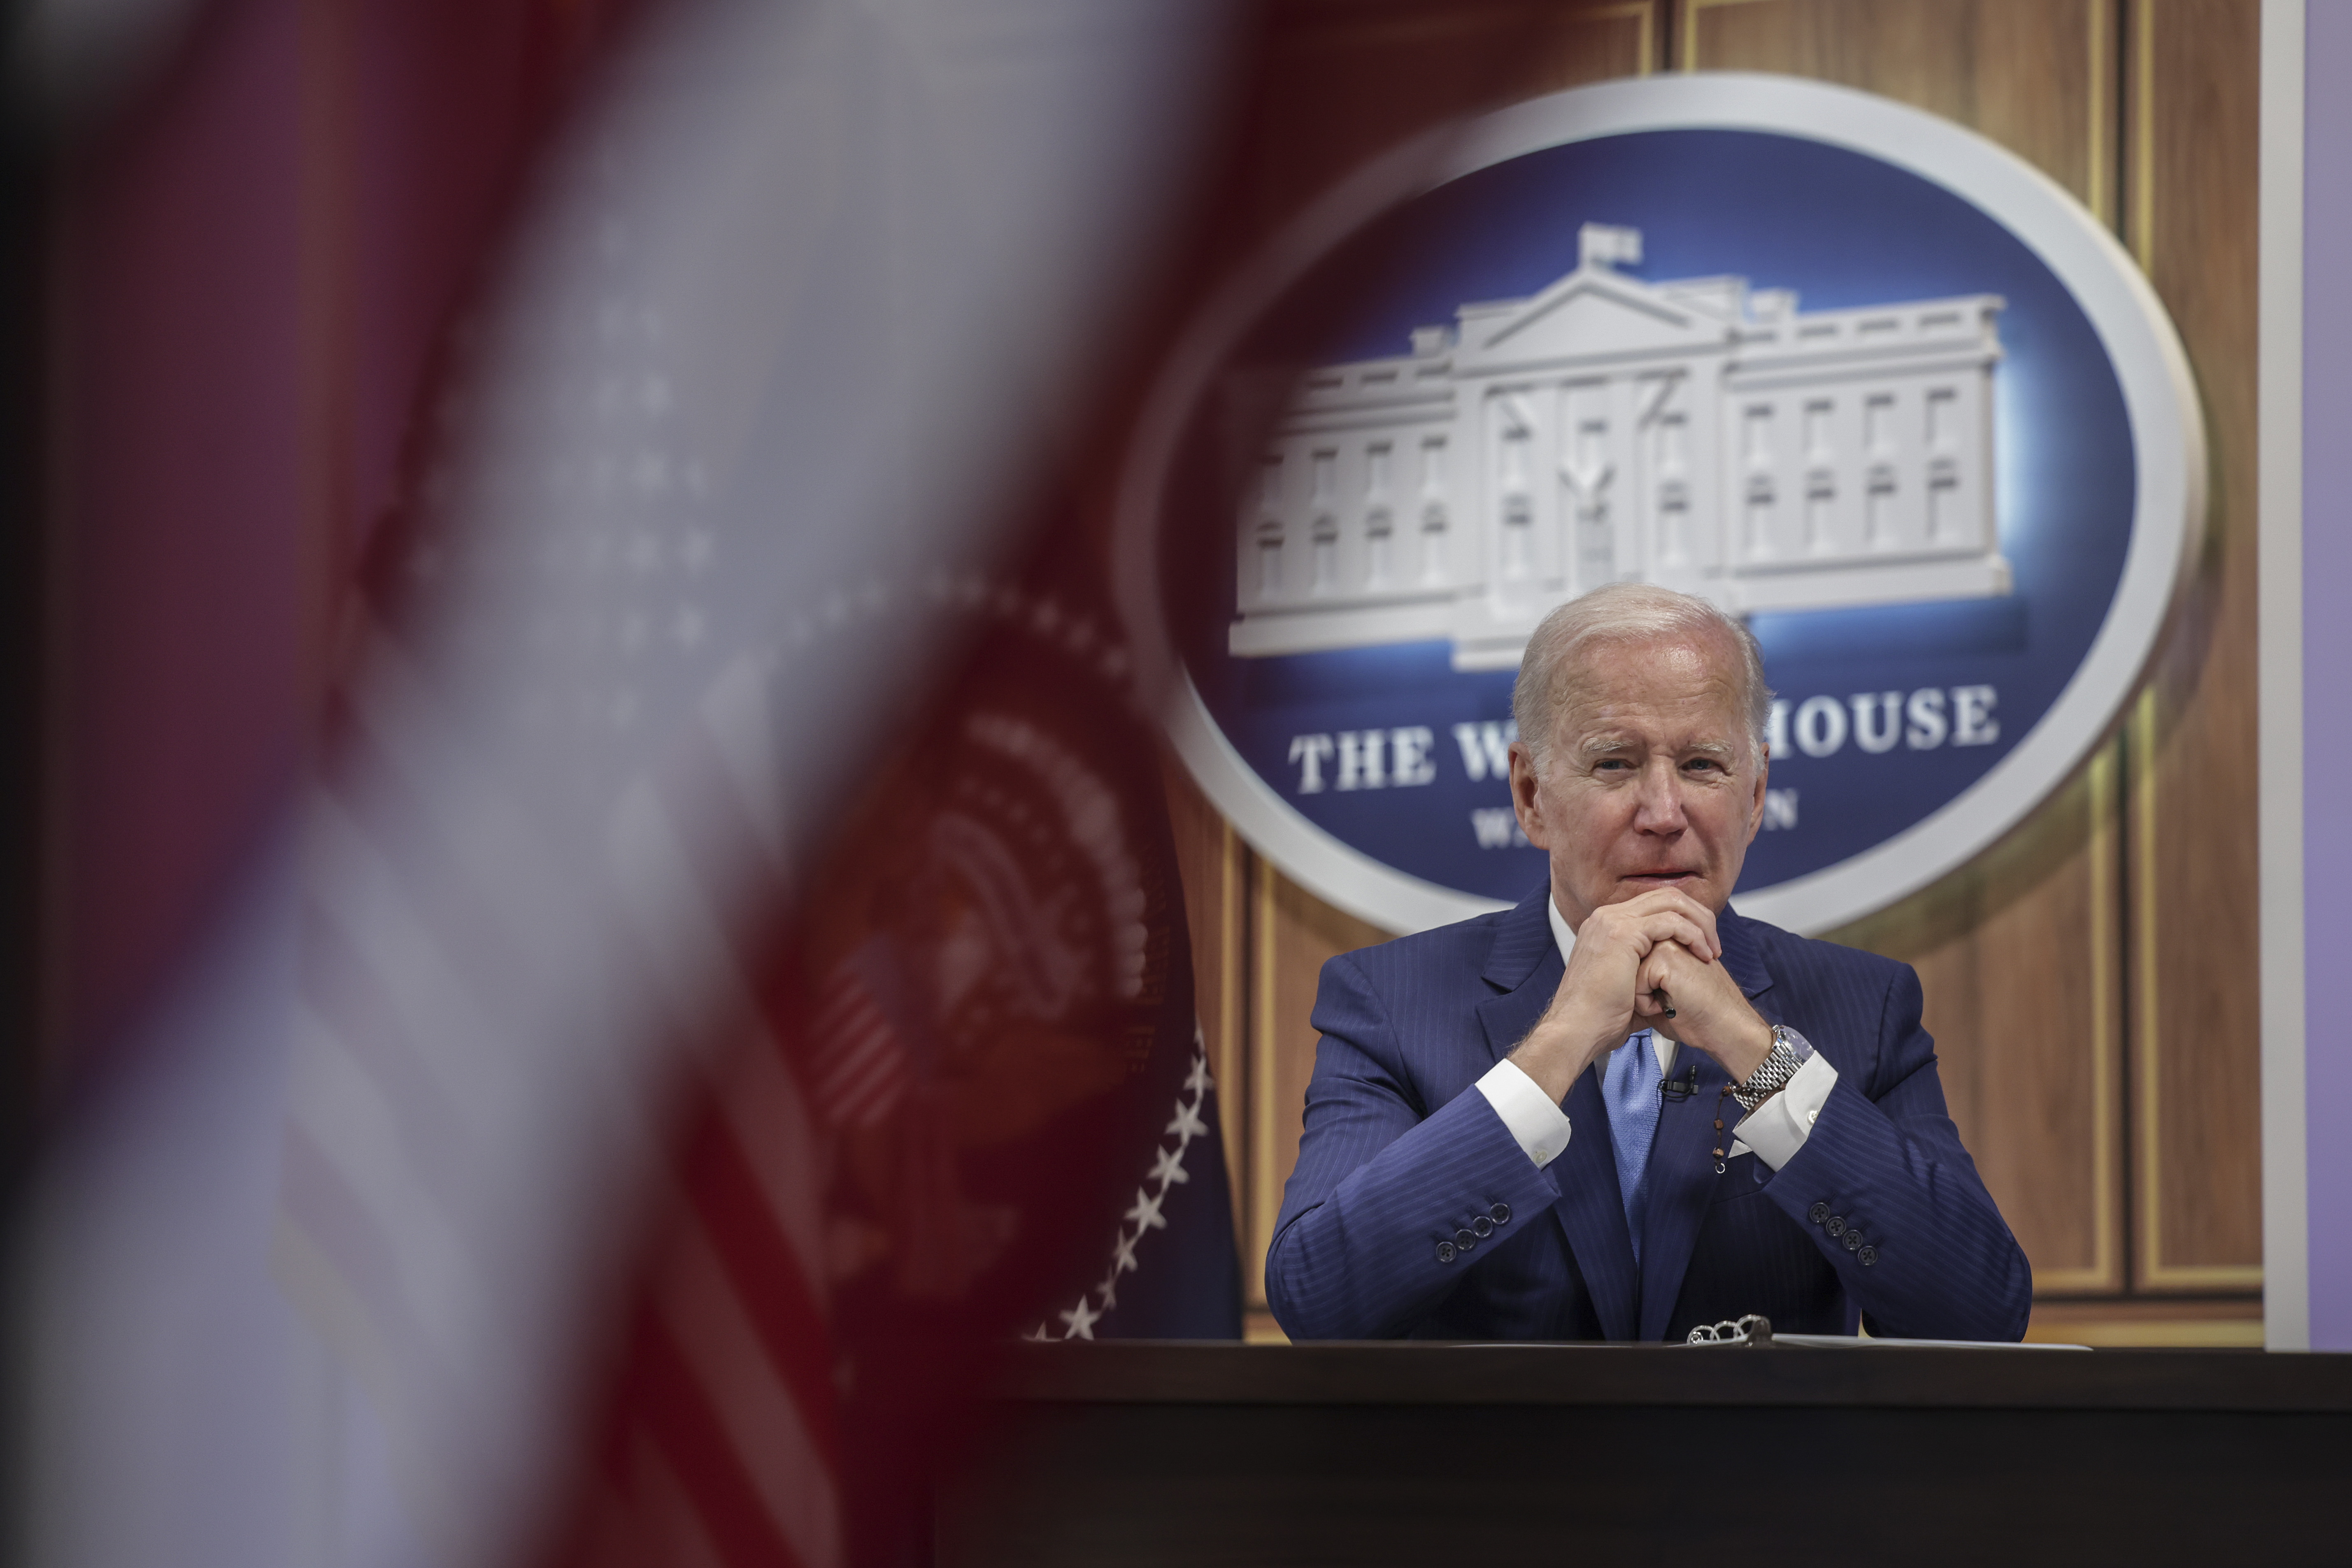 President Joe Biden listens to someone off-camera while sitting at a table with the White House logo behind him.